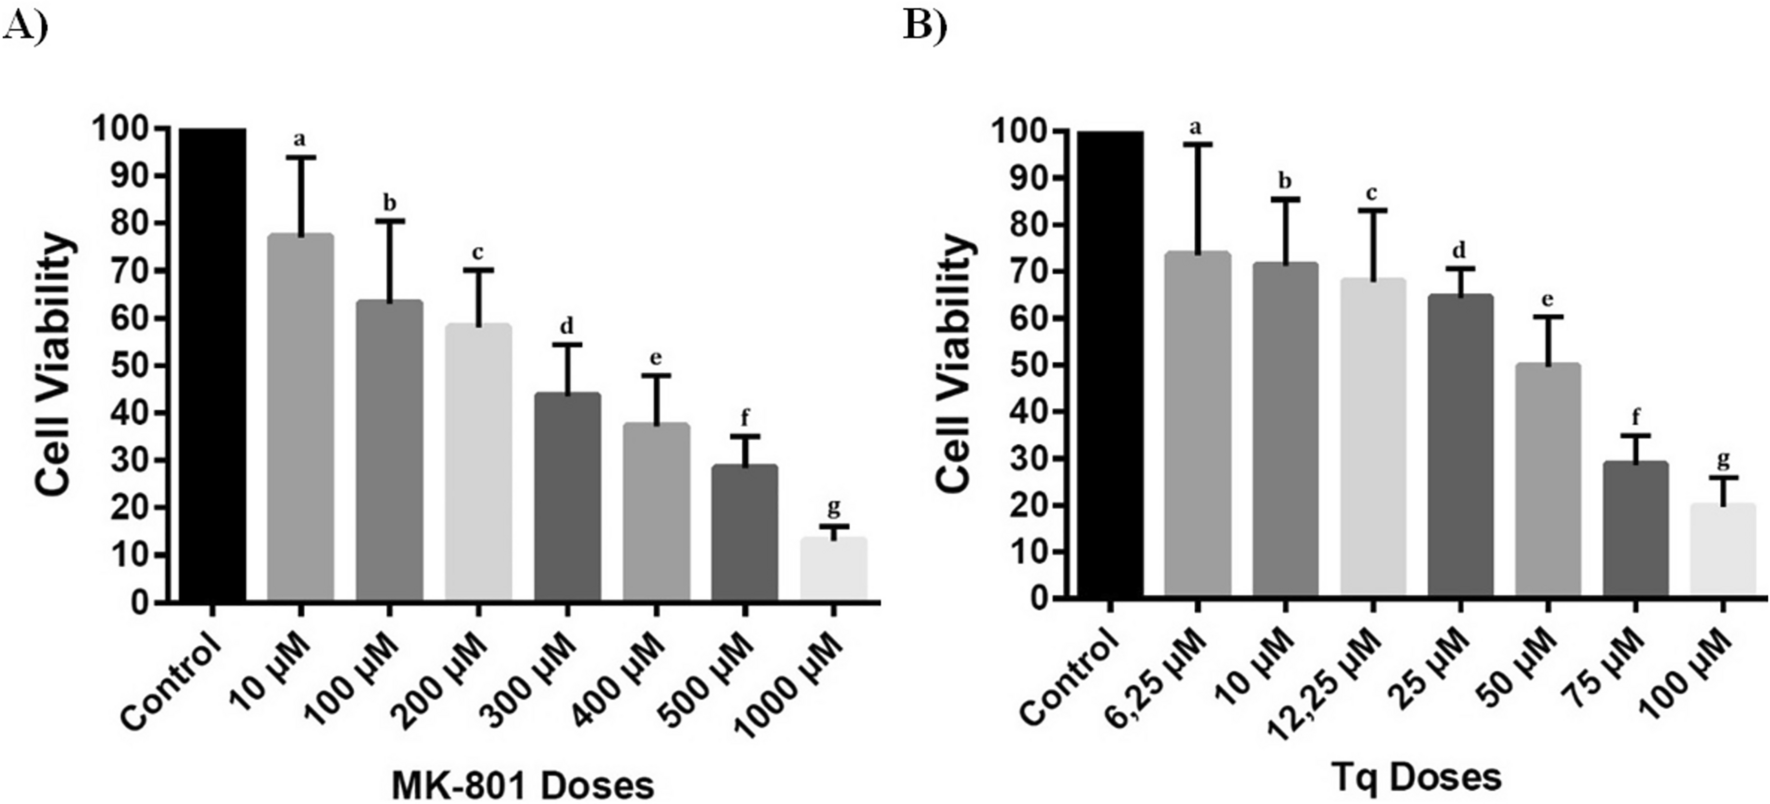 N-methyl-D-aspartate receptors and thymoquinone induce apoptosis and alteration in mitochondria in colorectal cancer cells